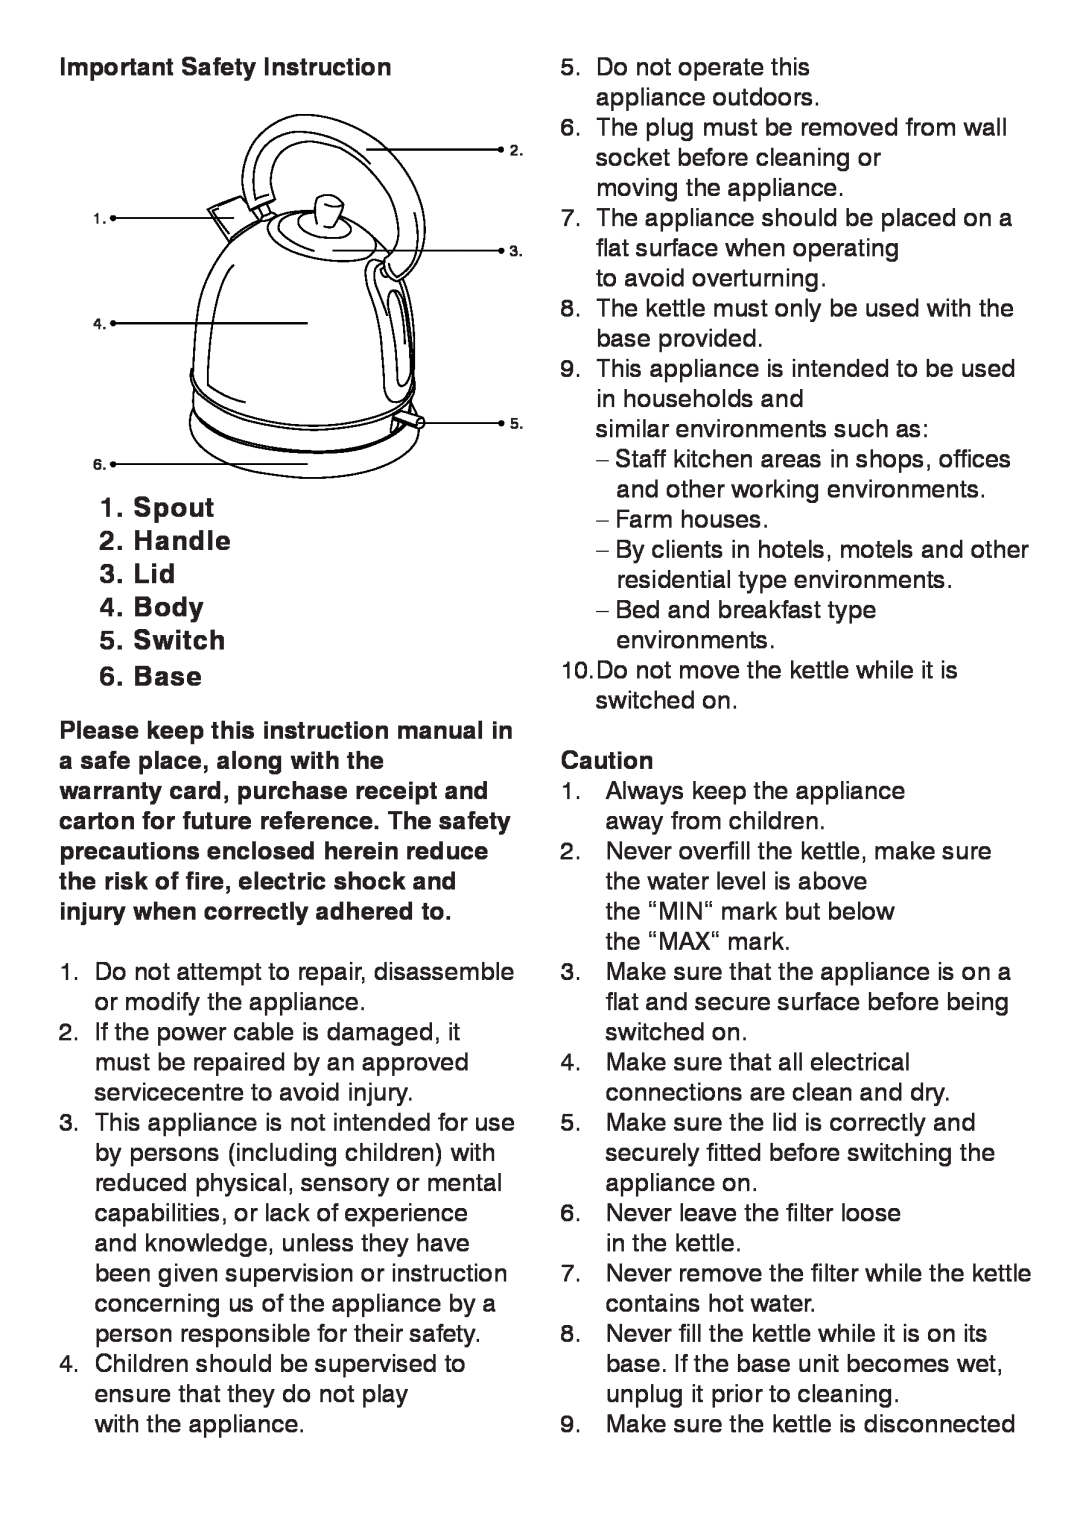 Mellerware 22362B manual Important Safety Instruction, Spout 2. Handle 3. Lid 4. Body 5. Switch 6. Base 